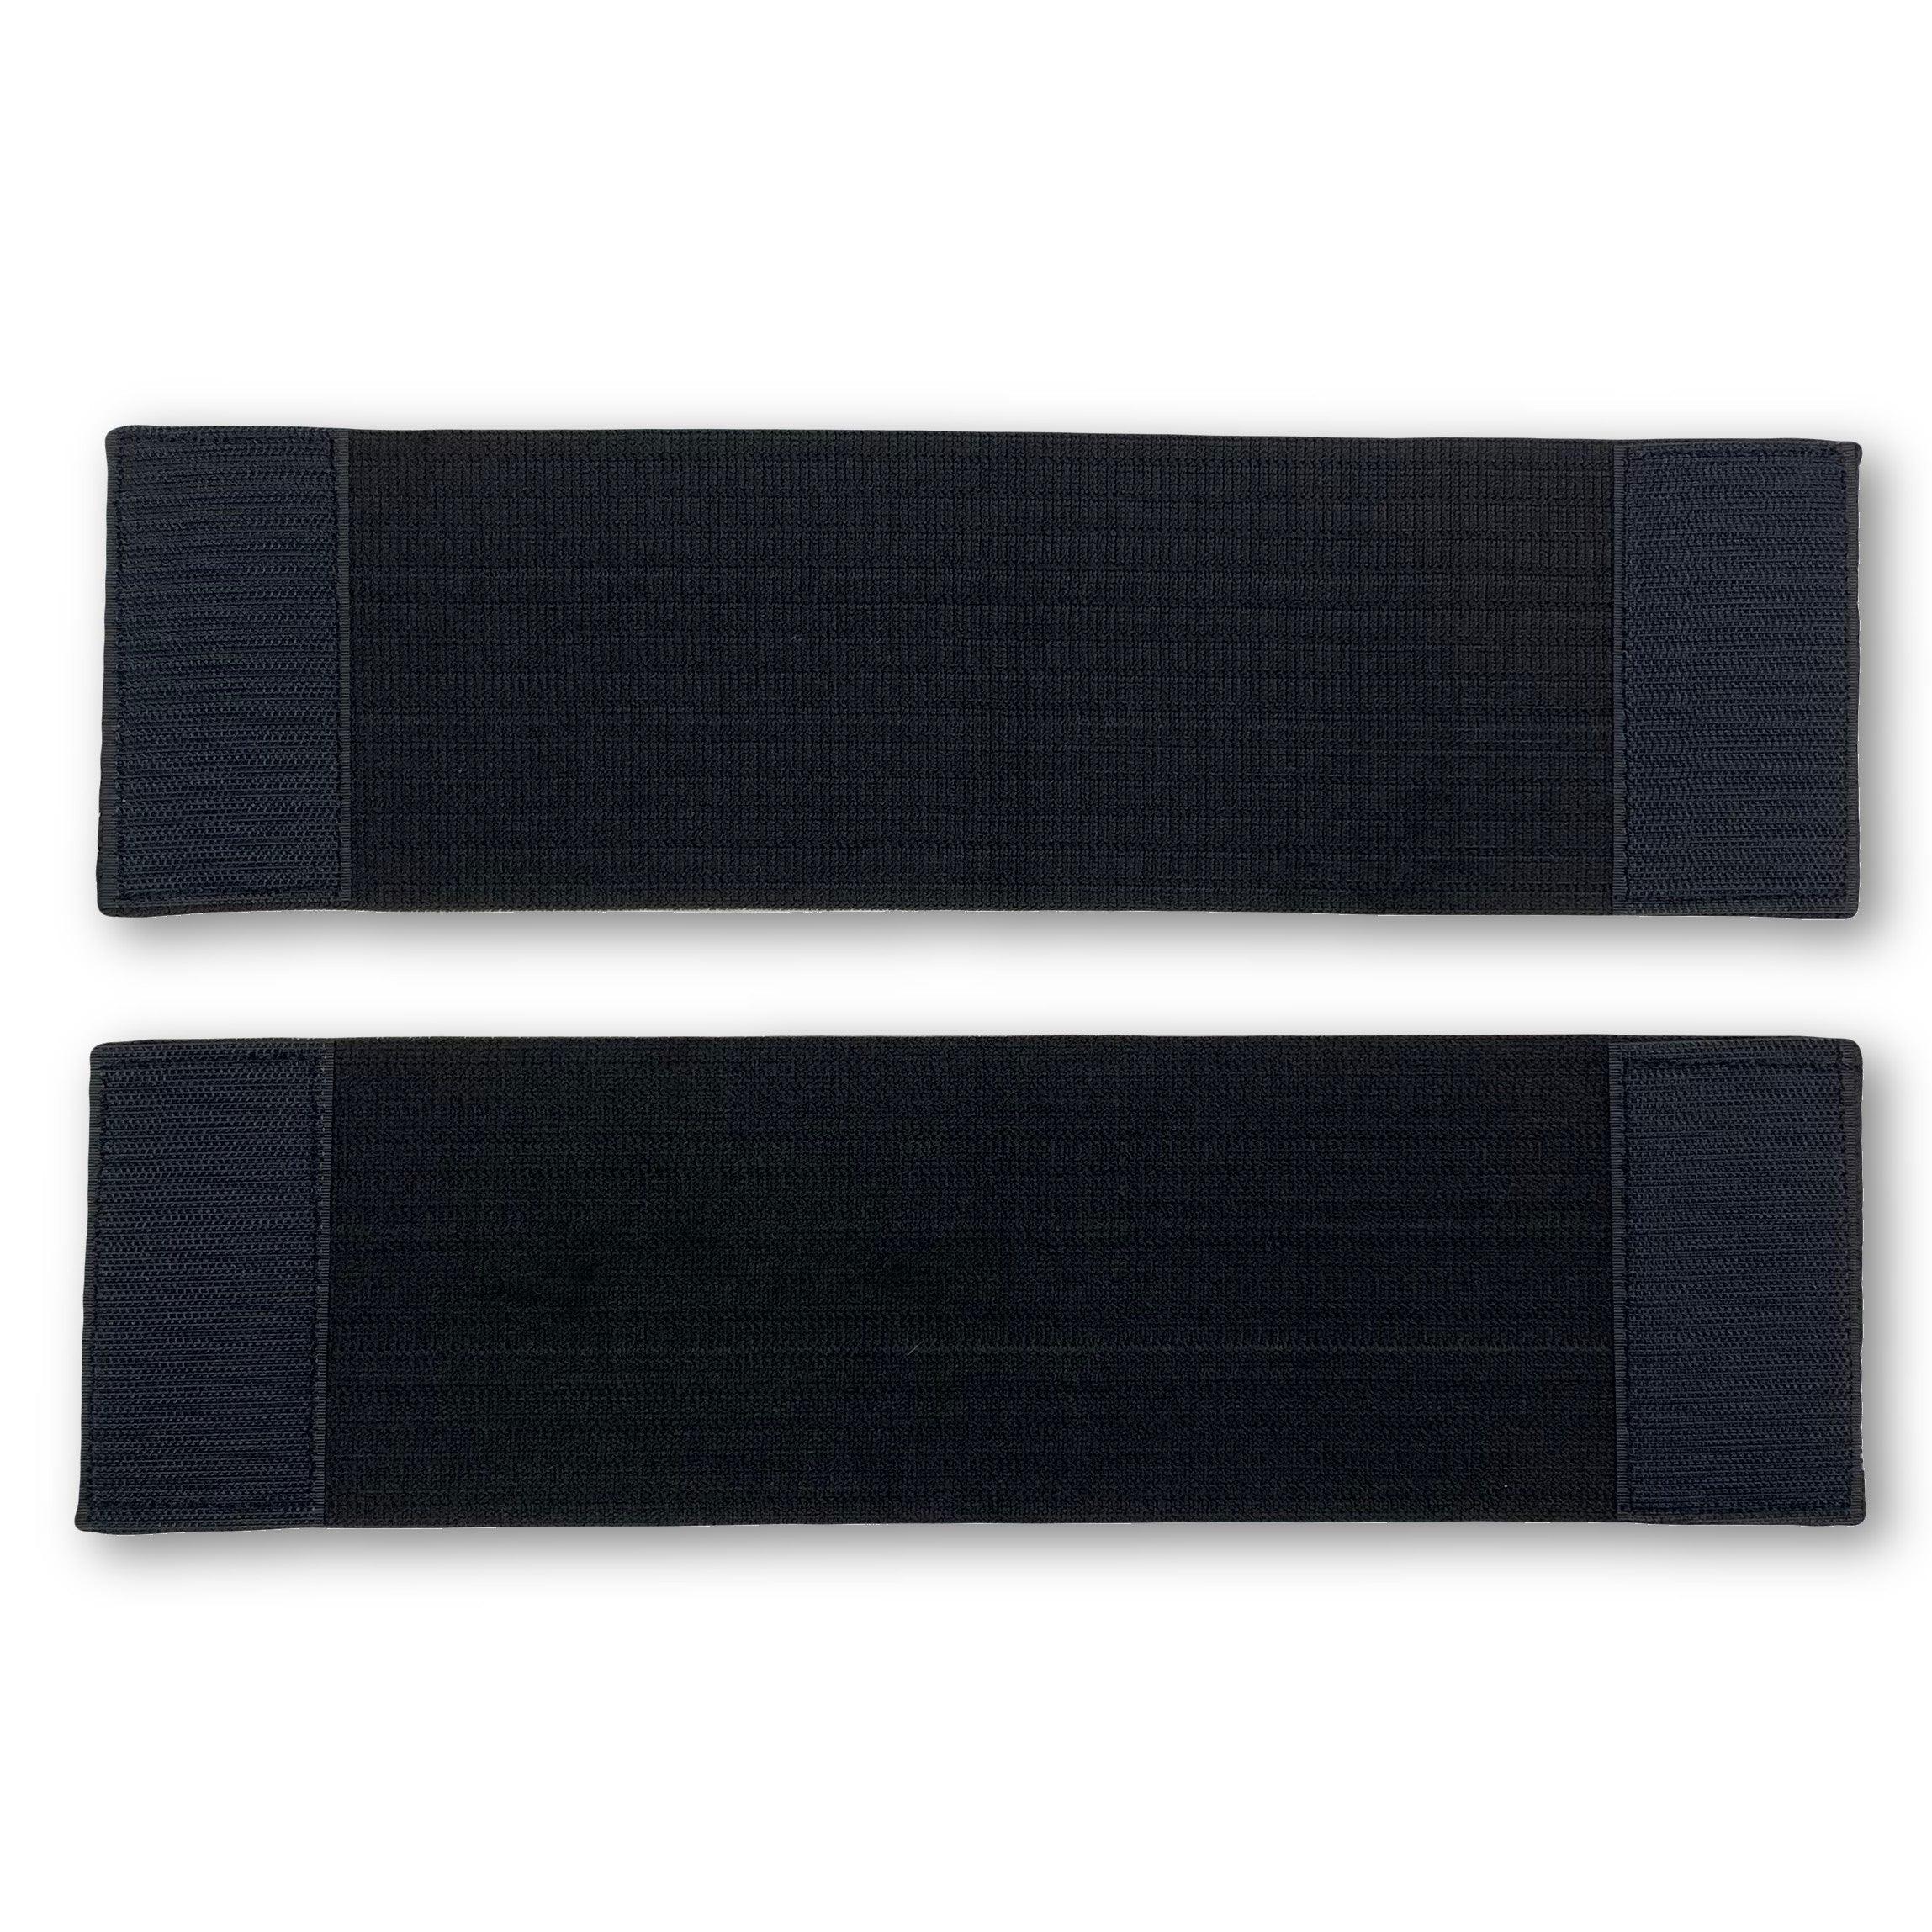 15 Inch Universal Cold Therapy Velcro Straps (2 Pack)